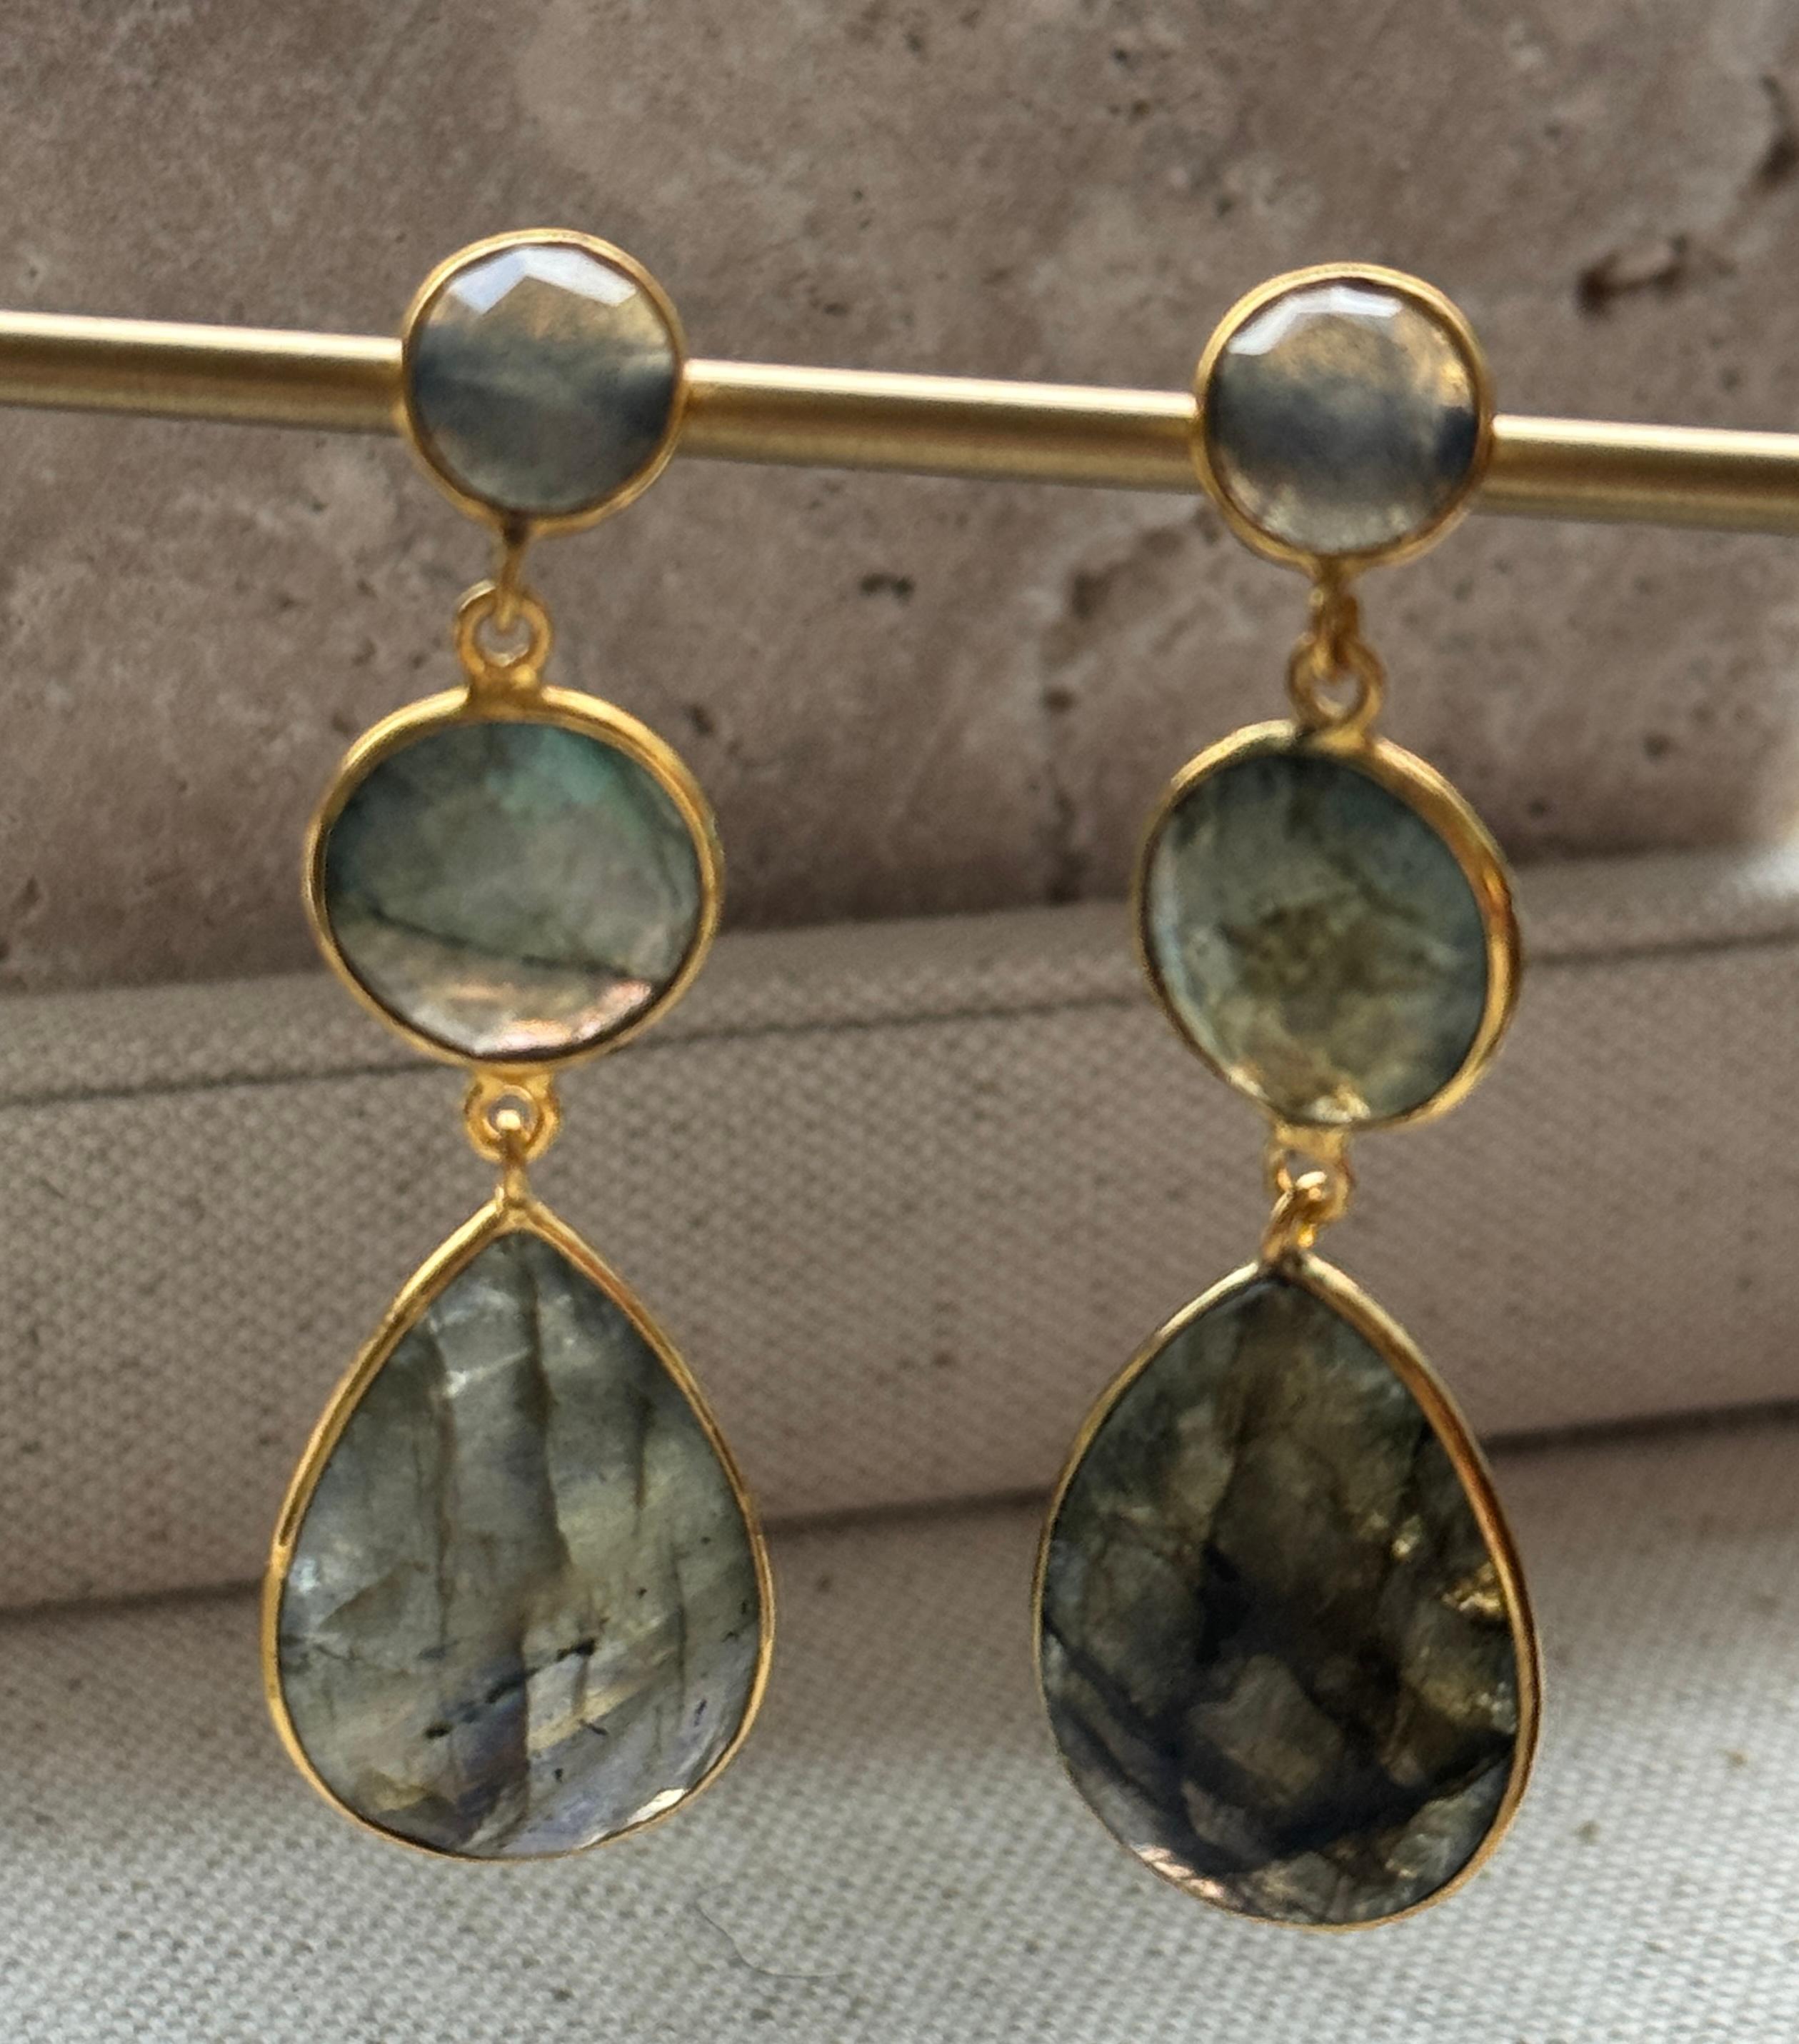 Stunning shades of peacock green and blue labradorite checkered cut earrings. These earrings were made in Jaipur and are set in 14K gold plating over sterling silver. They colors change to different shades of green, blue, turquoise and grey as they